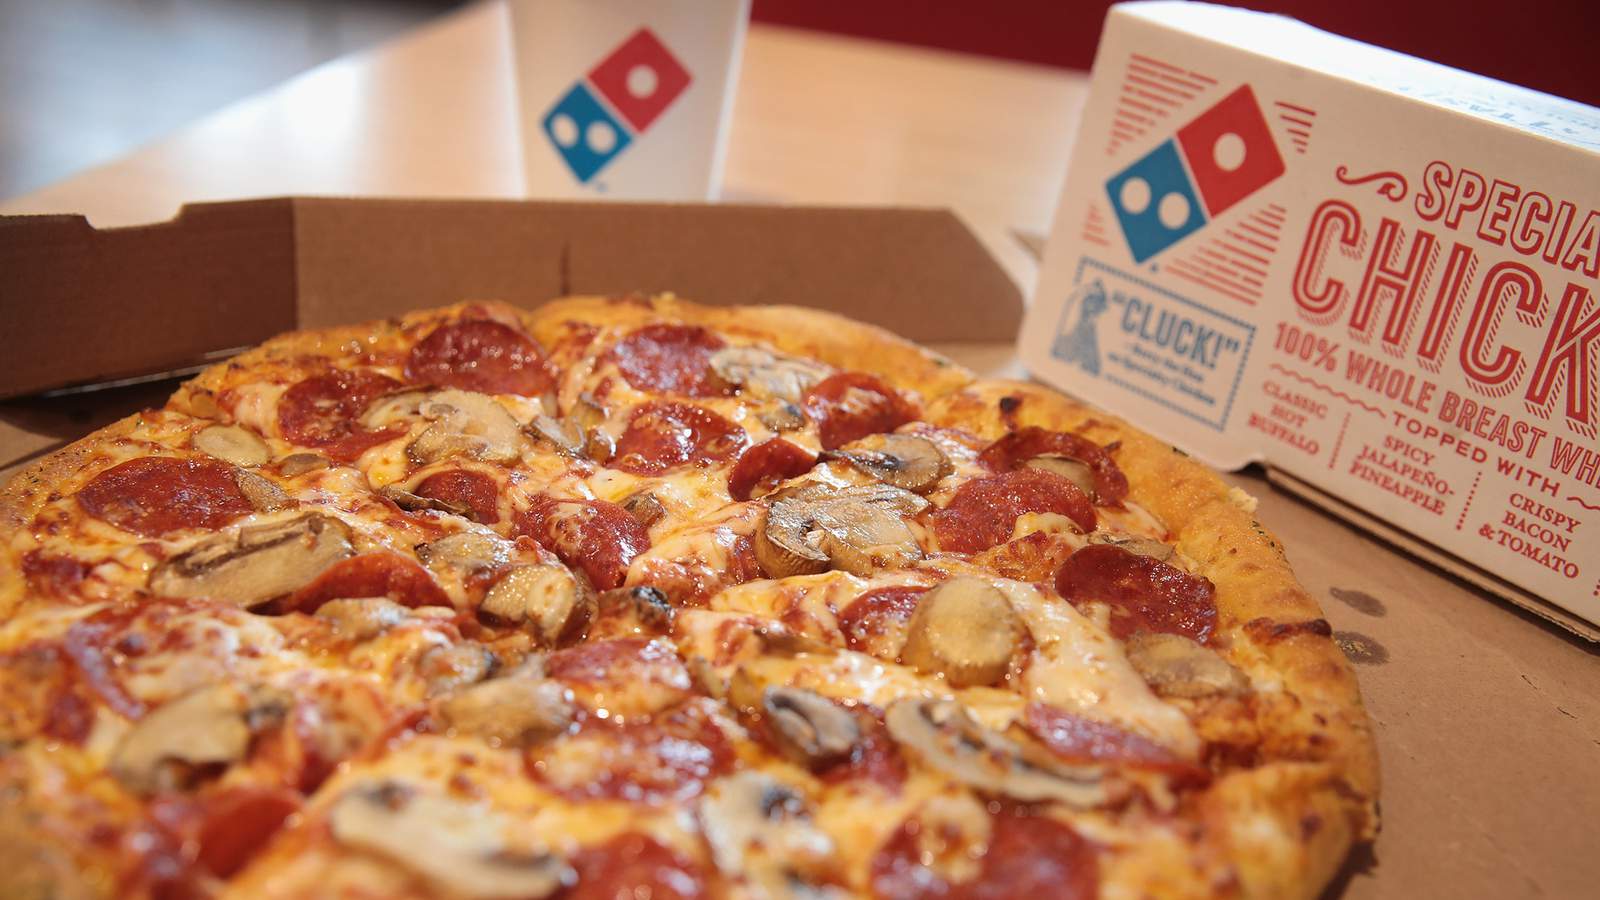 Dominos wants to hire more than 450 people in Southwest, Central Virginia